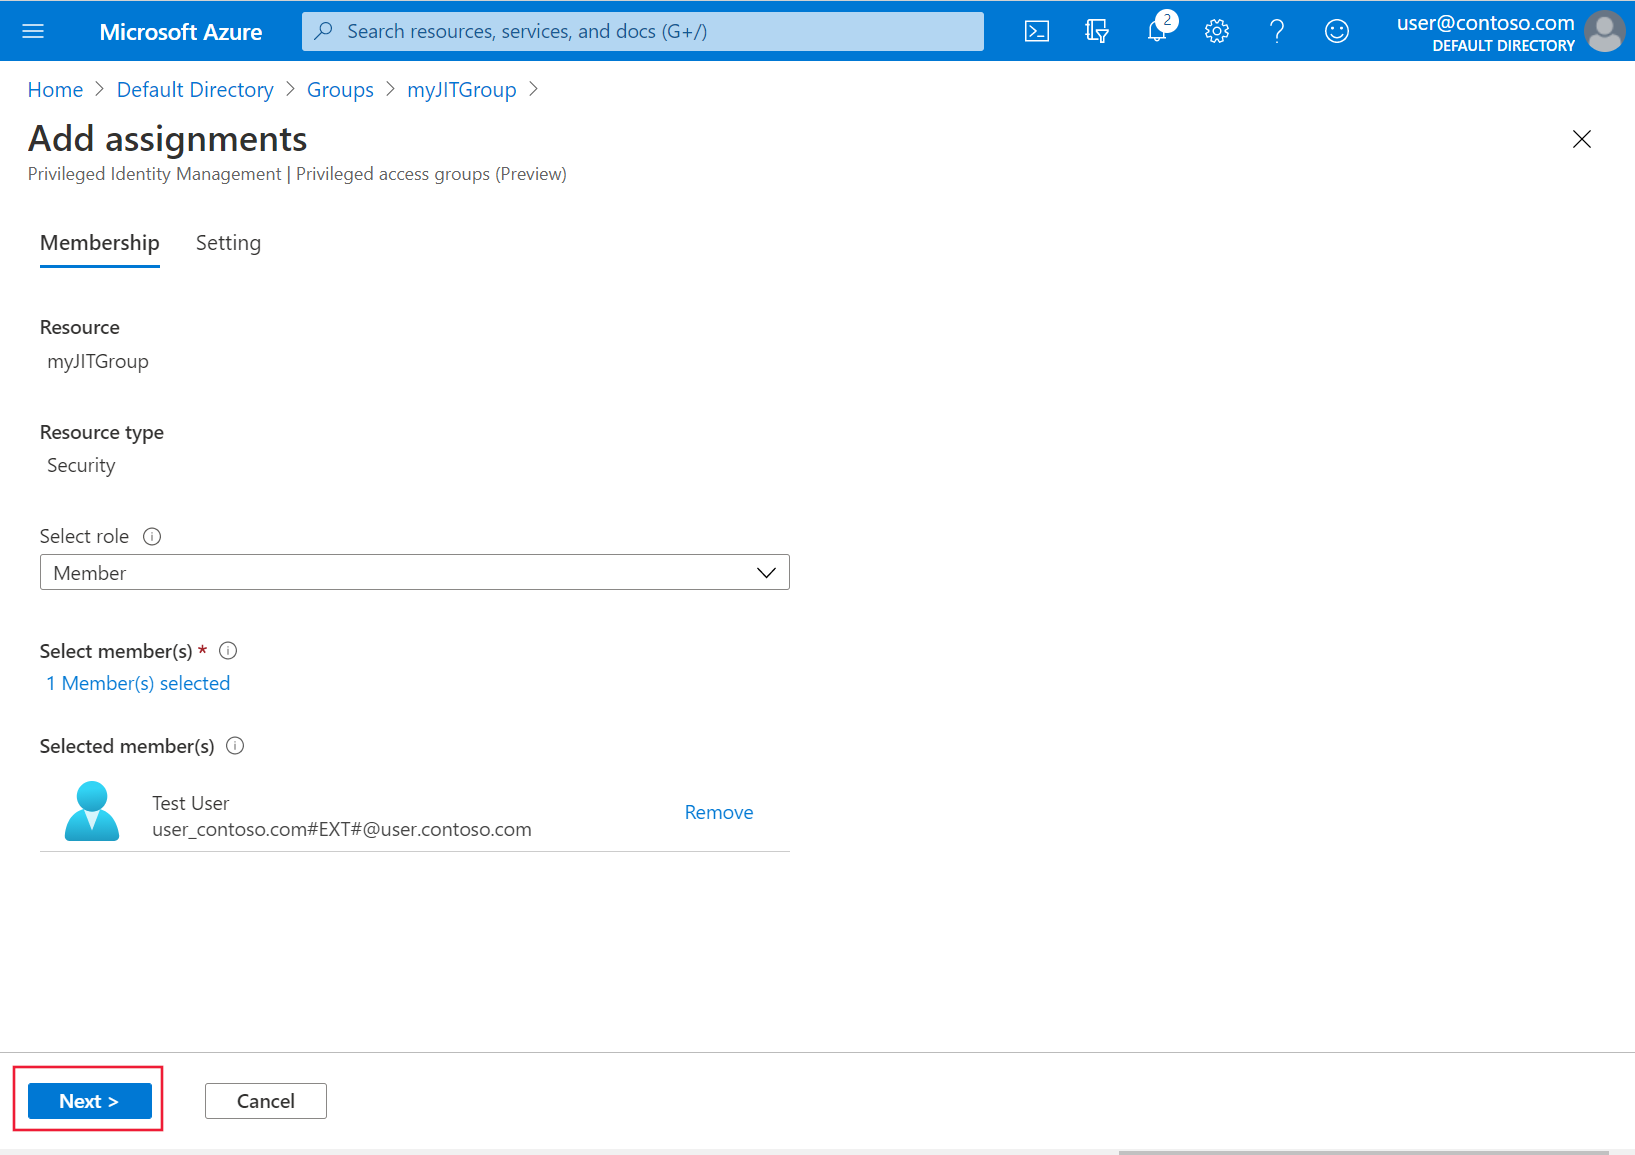 Screenshot showing how to add assignments in the Azure portal.